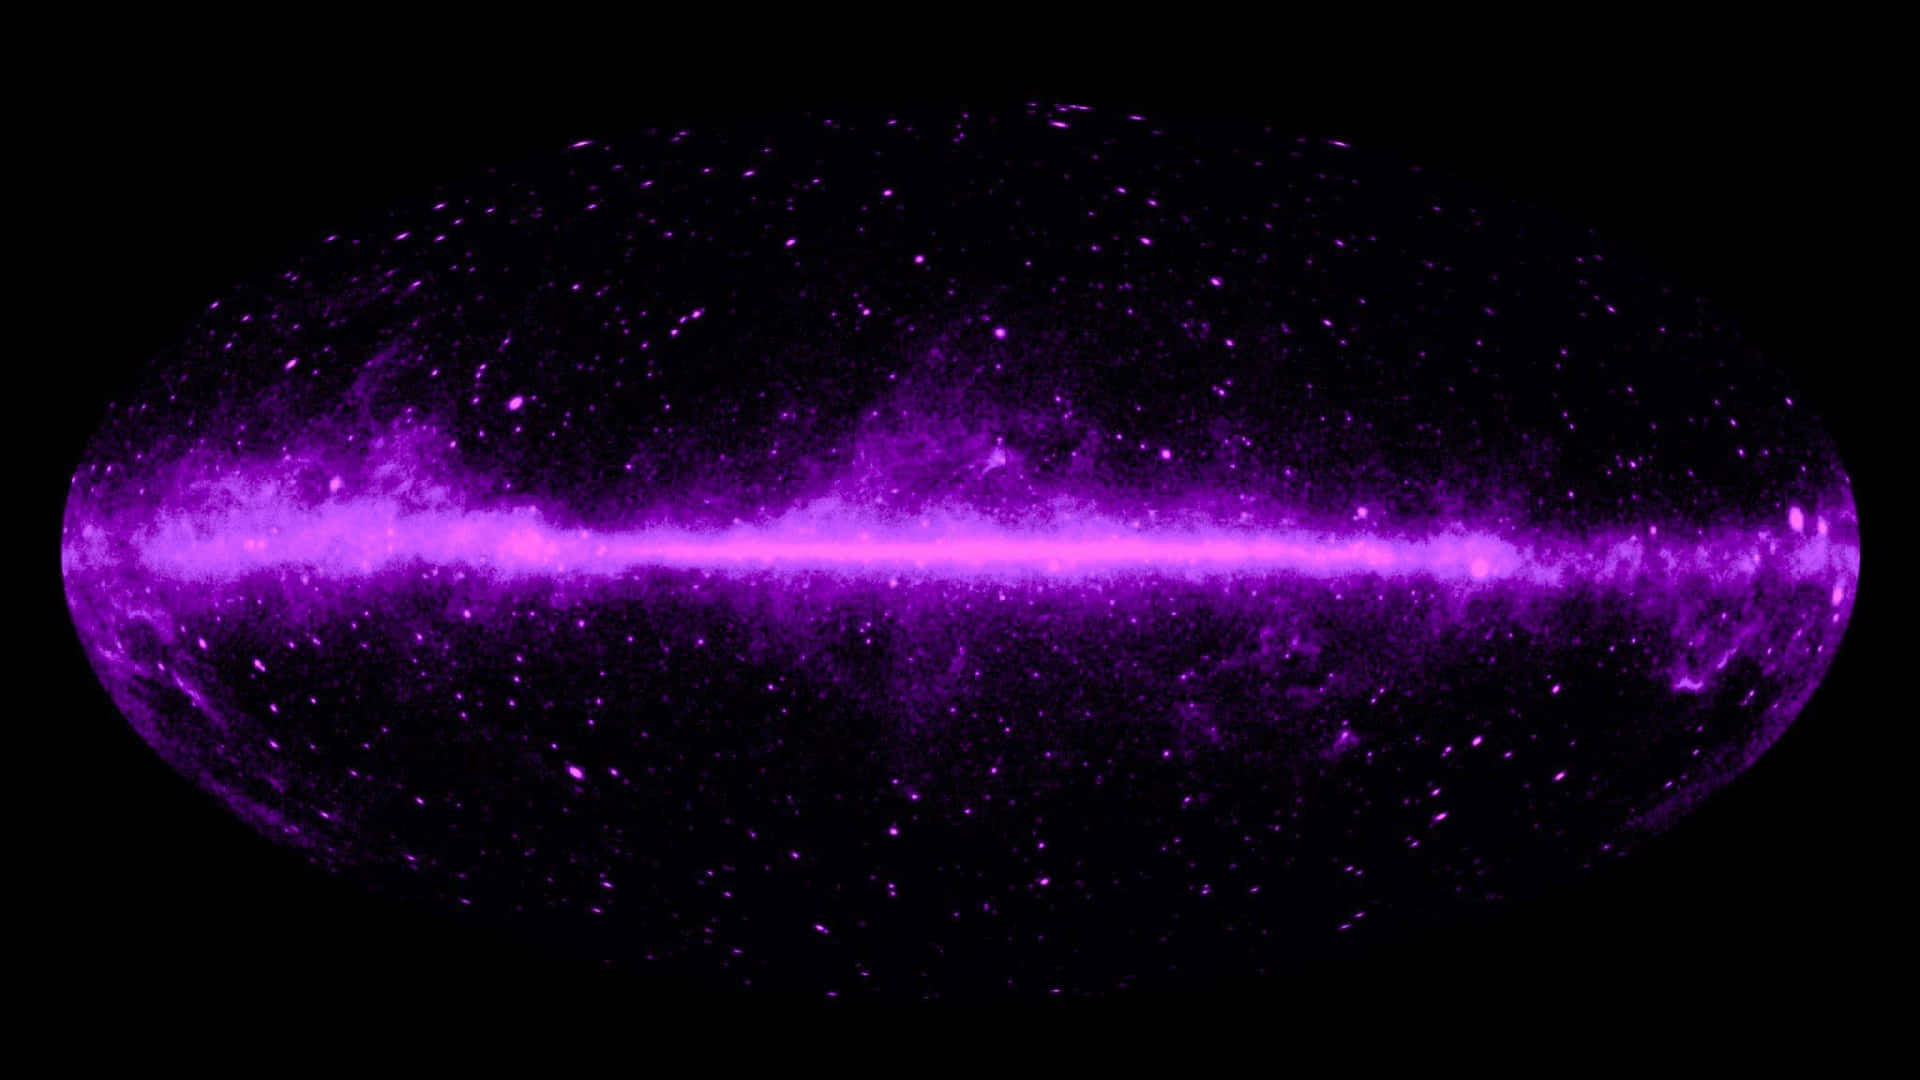 A Purple Galaxy With Stars In It